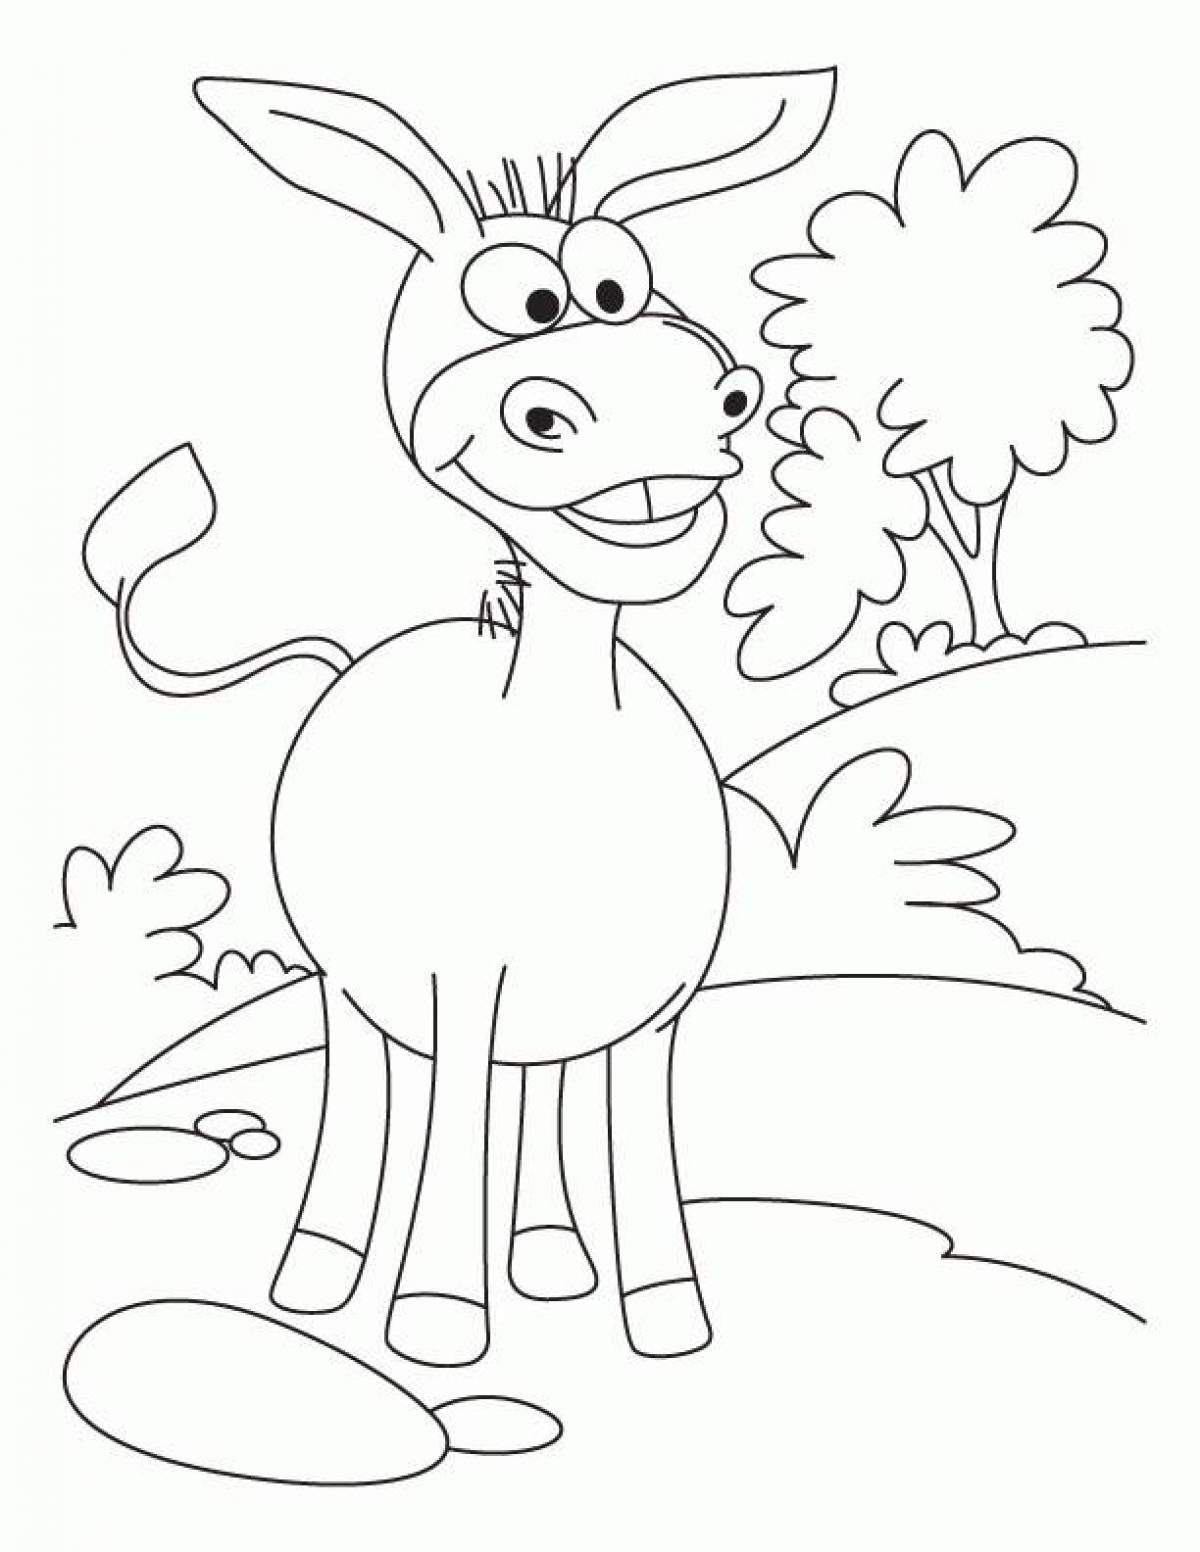 Happy donkey coloring page